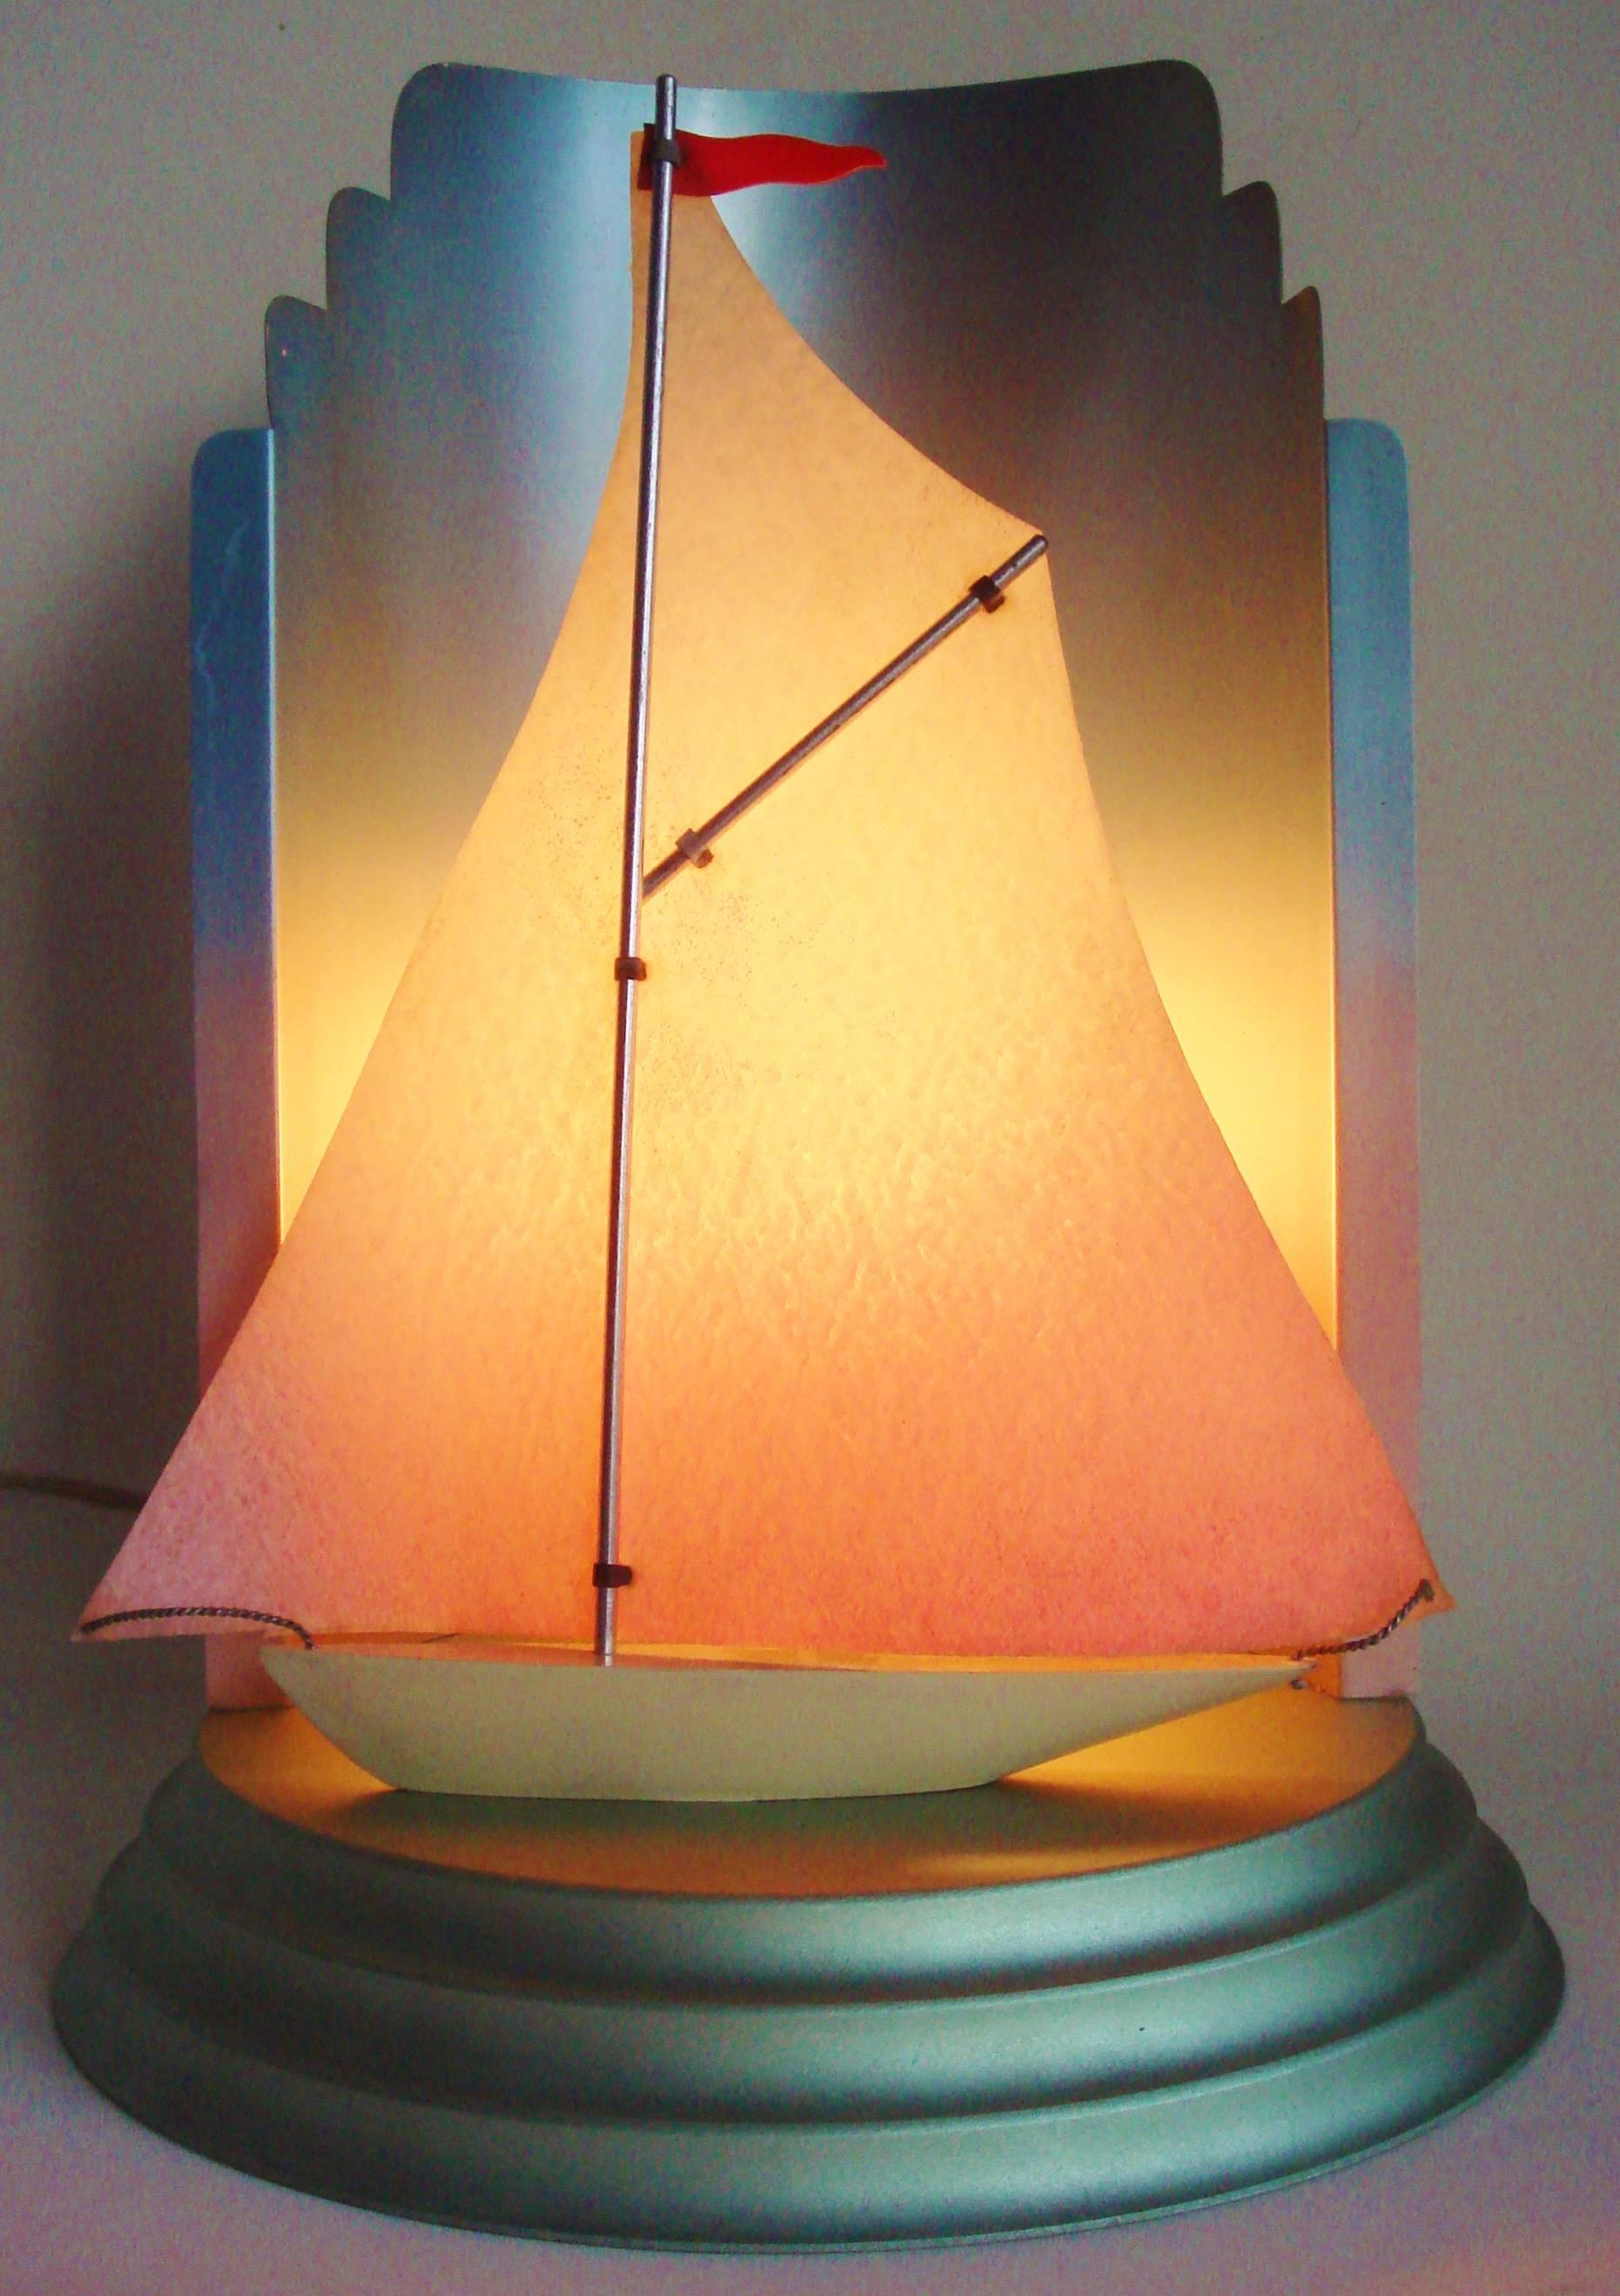 This stunning and rare English Art Deco Aluminium yacht lamp is from the Kingsway range by the famed silversmiths, William Suckling Limited of Albion and Vyse Streets, Birmingham. It features a cream hulled yacht with a polished chrome mast,